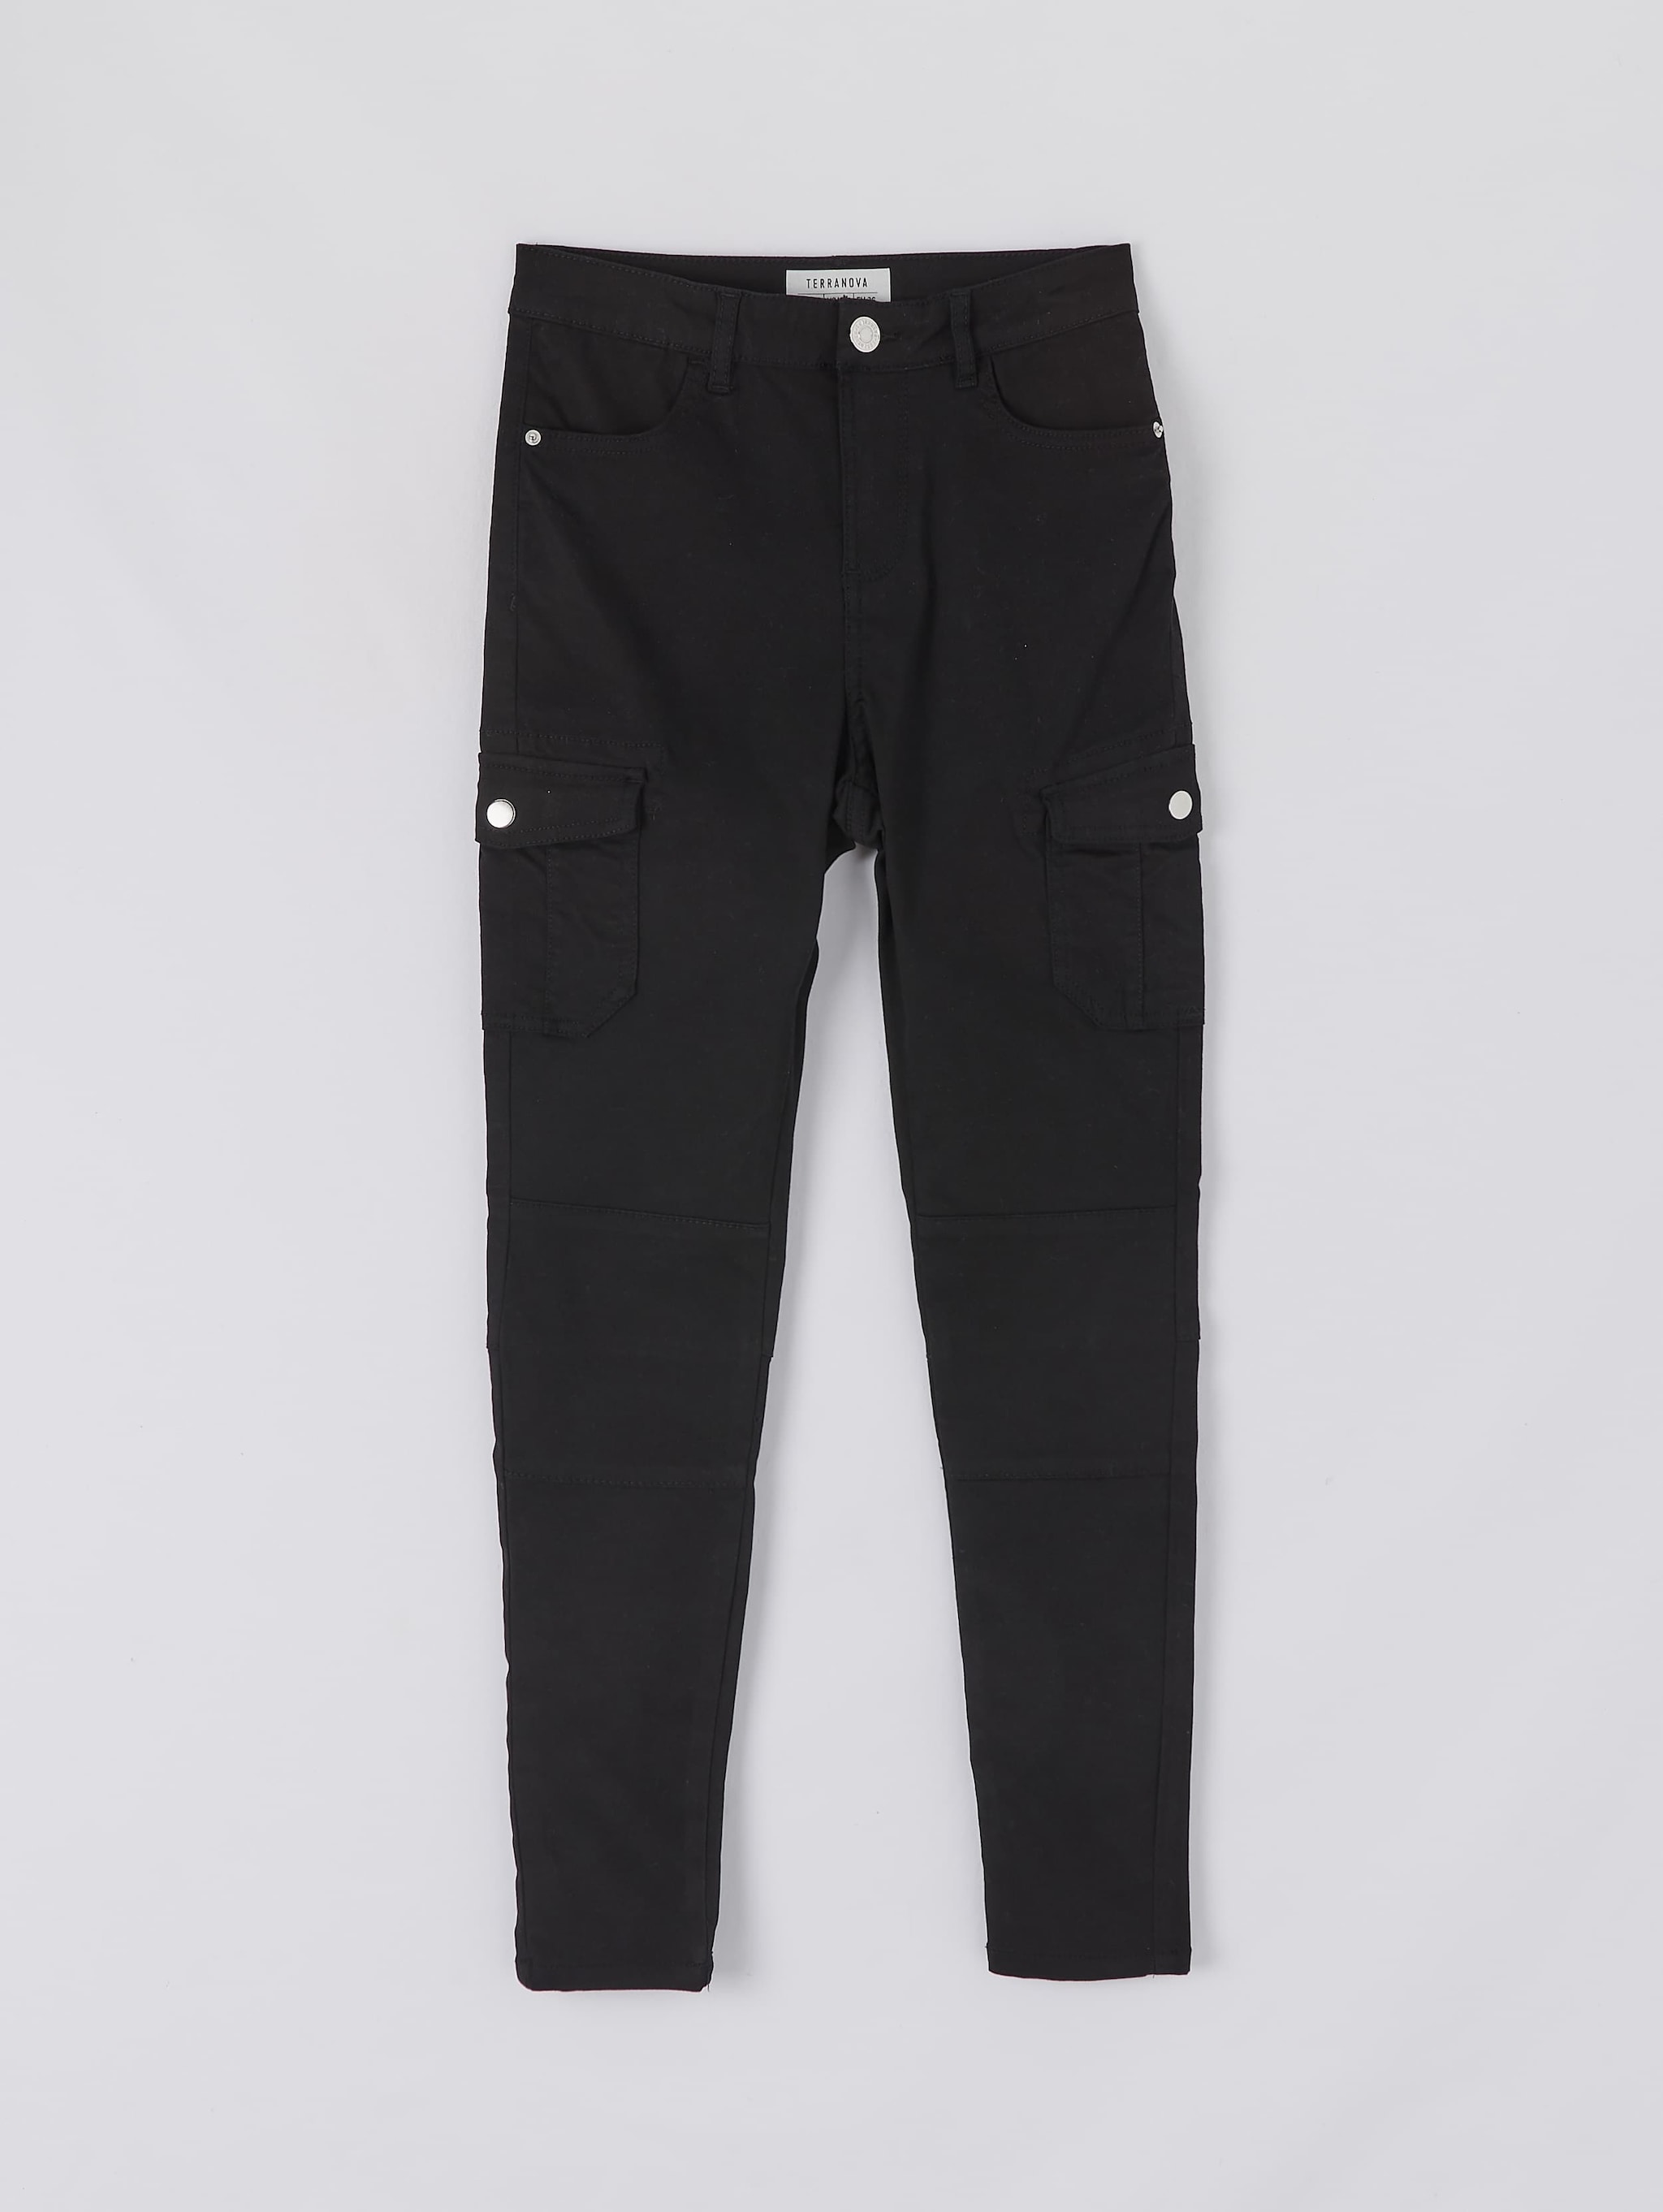 flying machine blue label jeans price